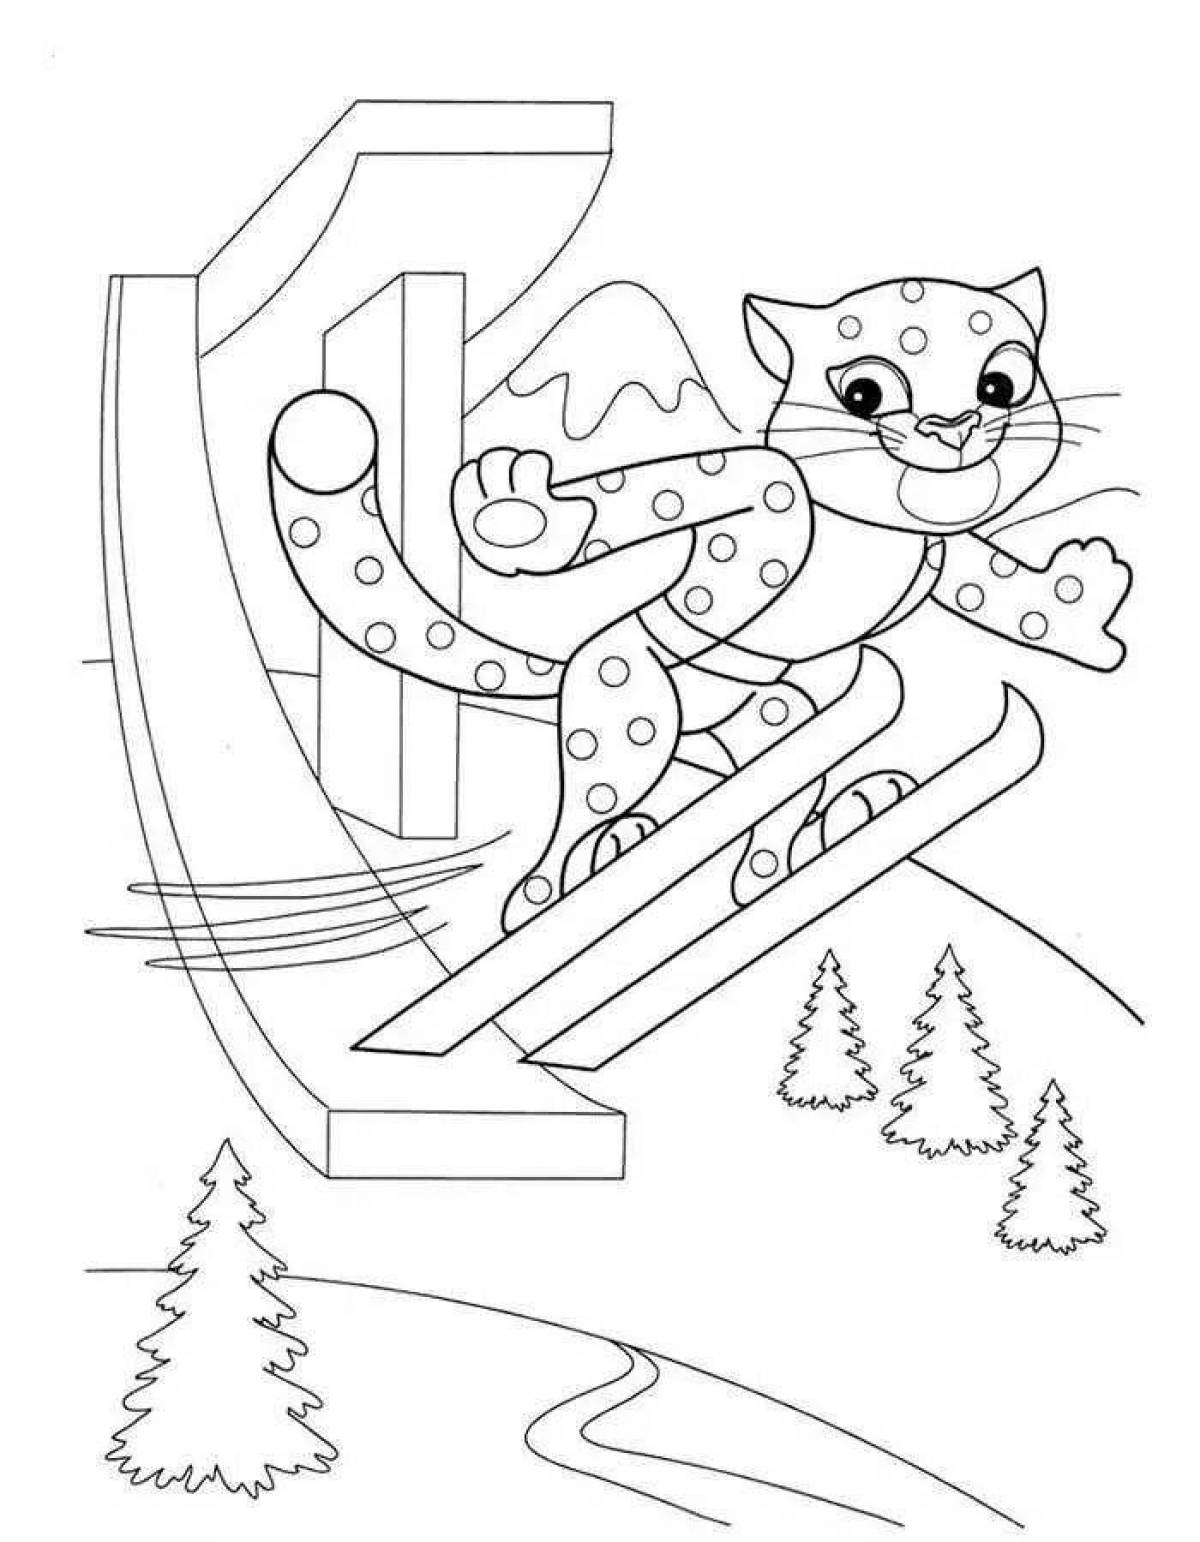 Amazing winter sports coloring page for 4-5 year olds